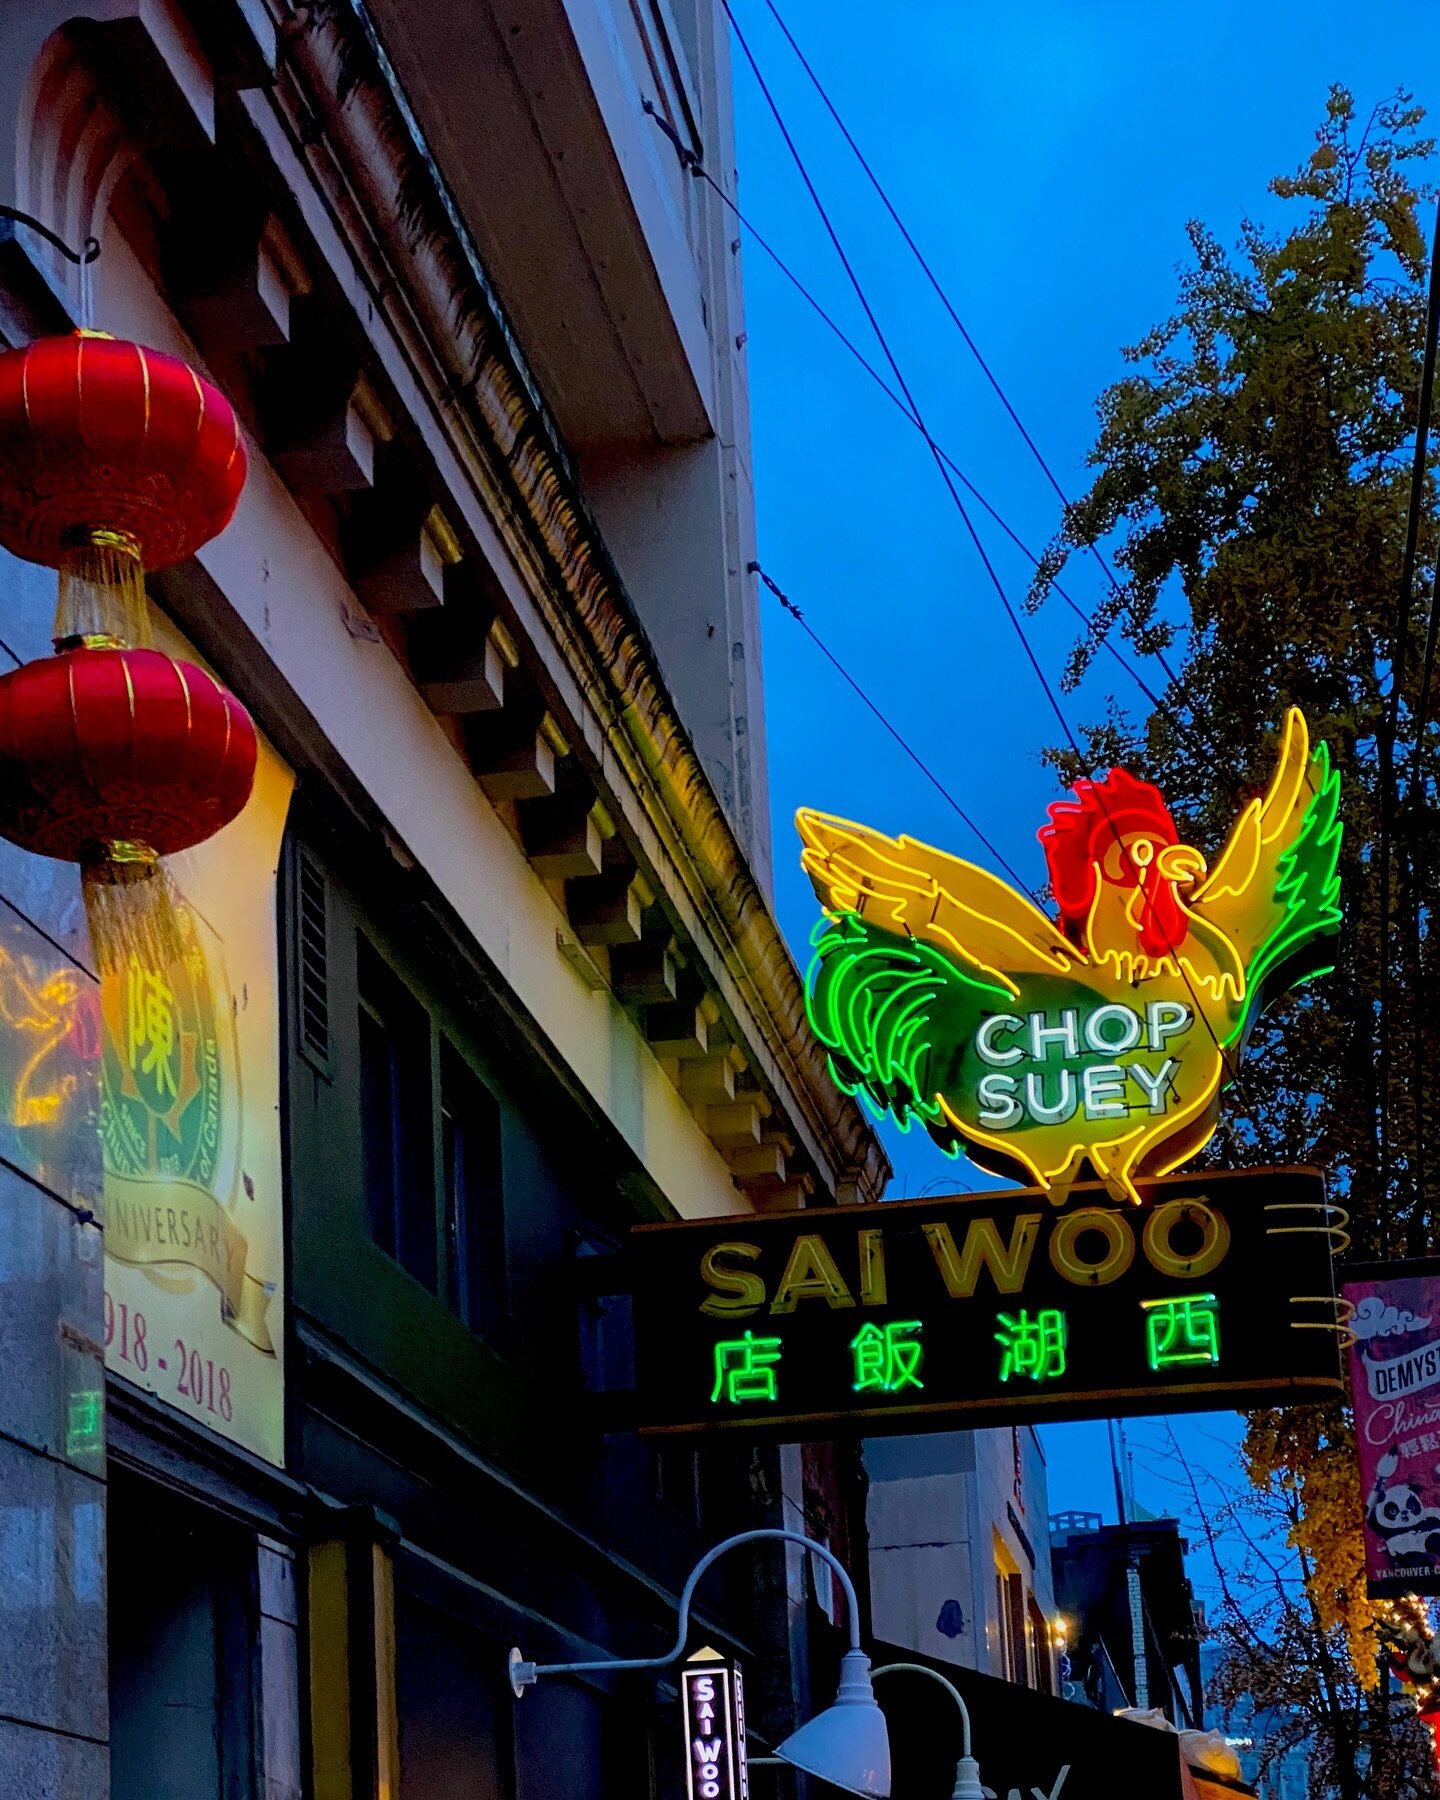 Chinatown, Vancouver. #gafferlife #vancouver #chinatown #neon #design